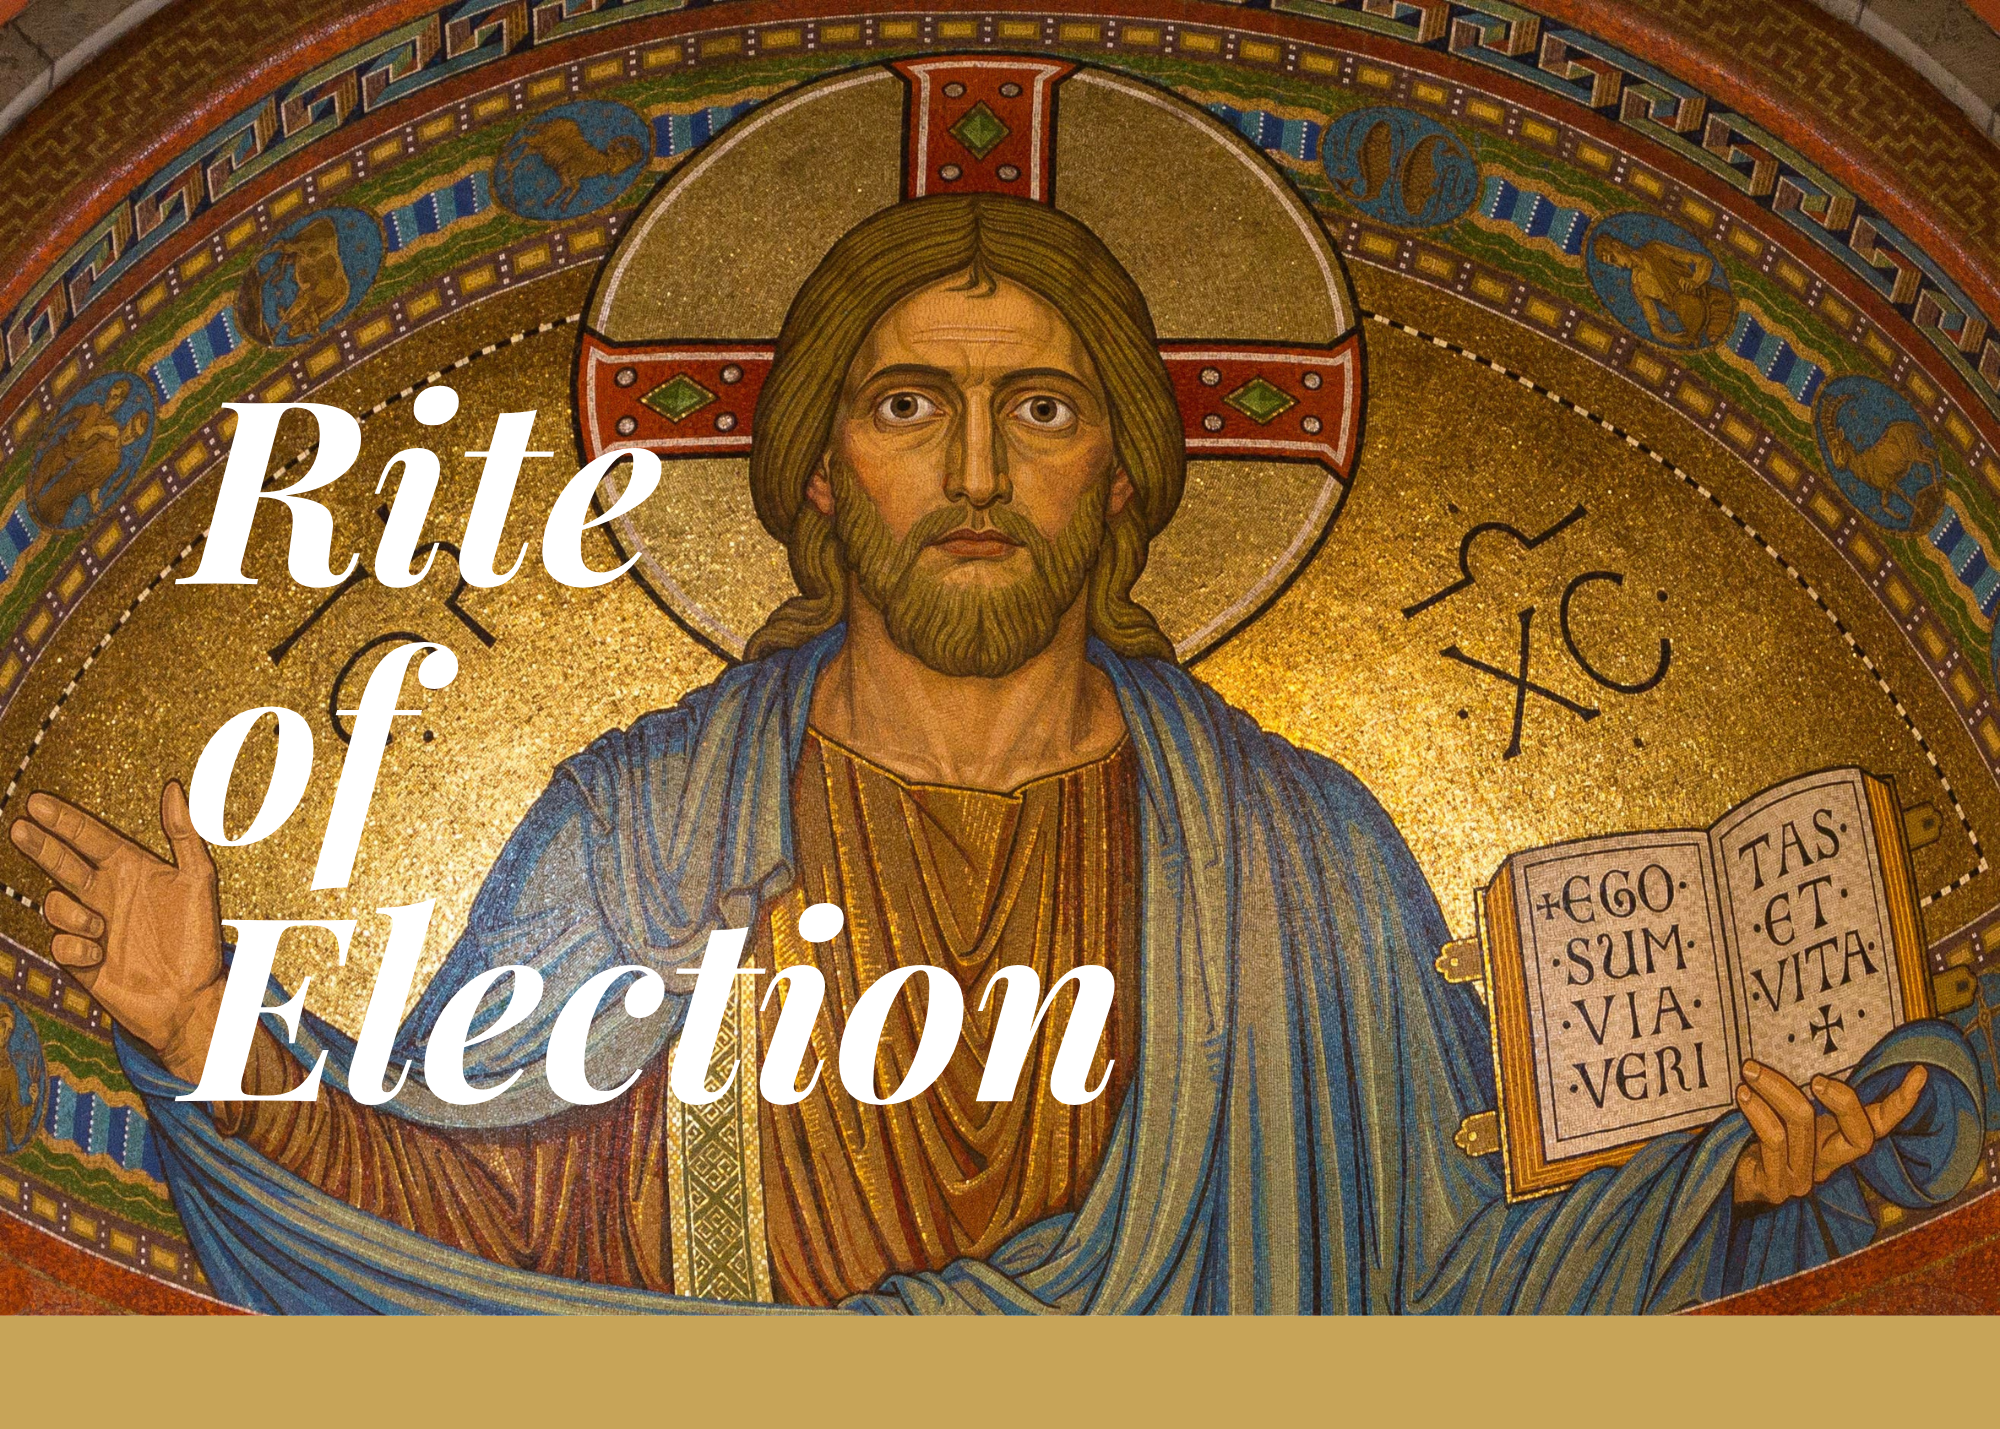 Rite of Election-San Diego